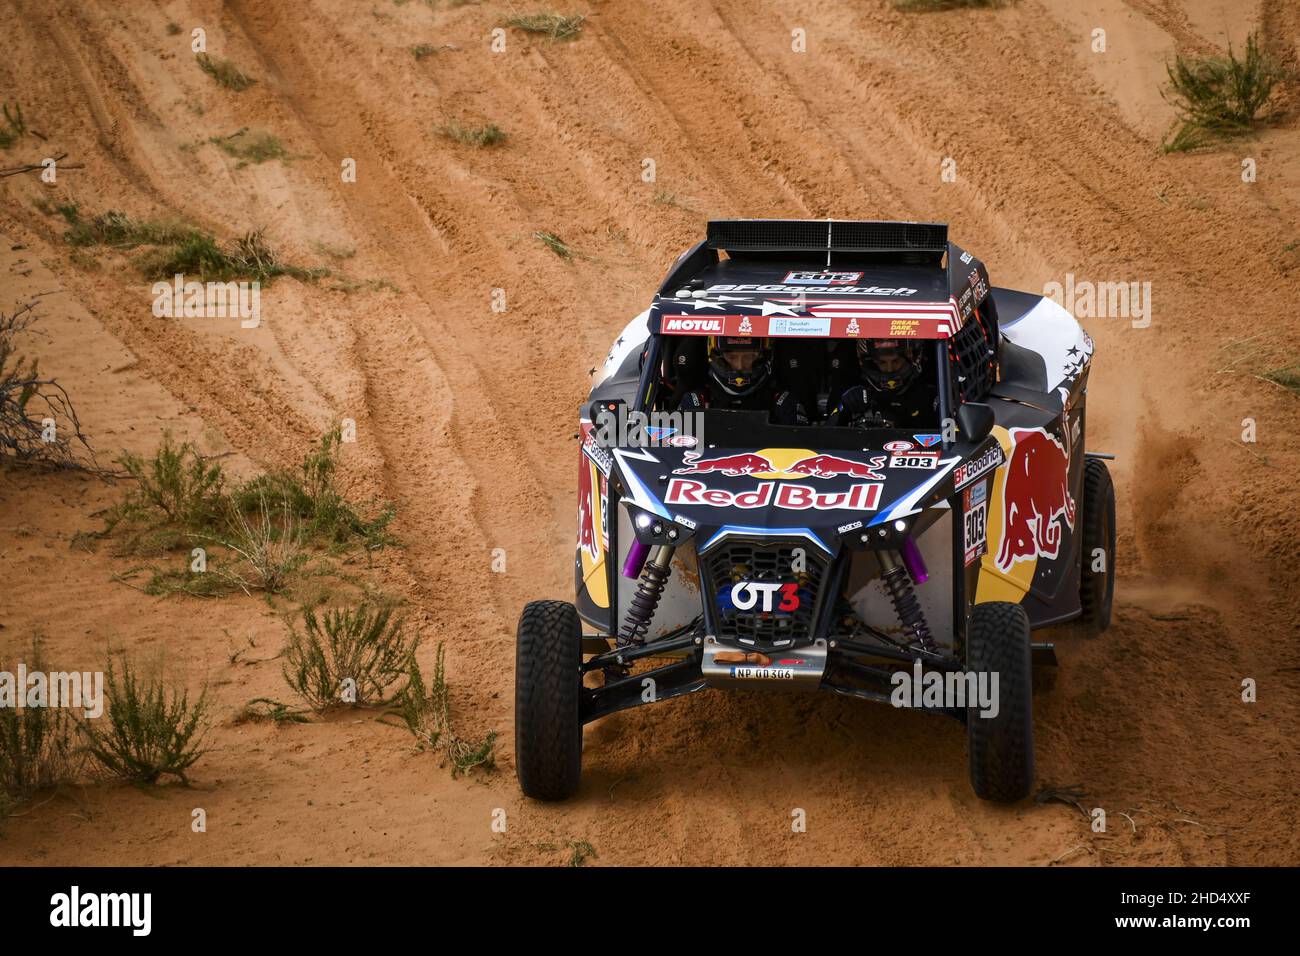 303 Quintero Seth (usa), Zenz Dennis (ger), Red Bull Junior Team, OT3 - 02, T3 FIA, W2RC, action during the Stage 2 of the Dakar Rally 2022 between Hail and Al